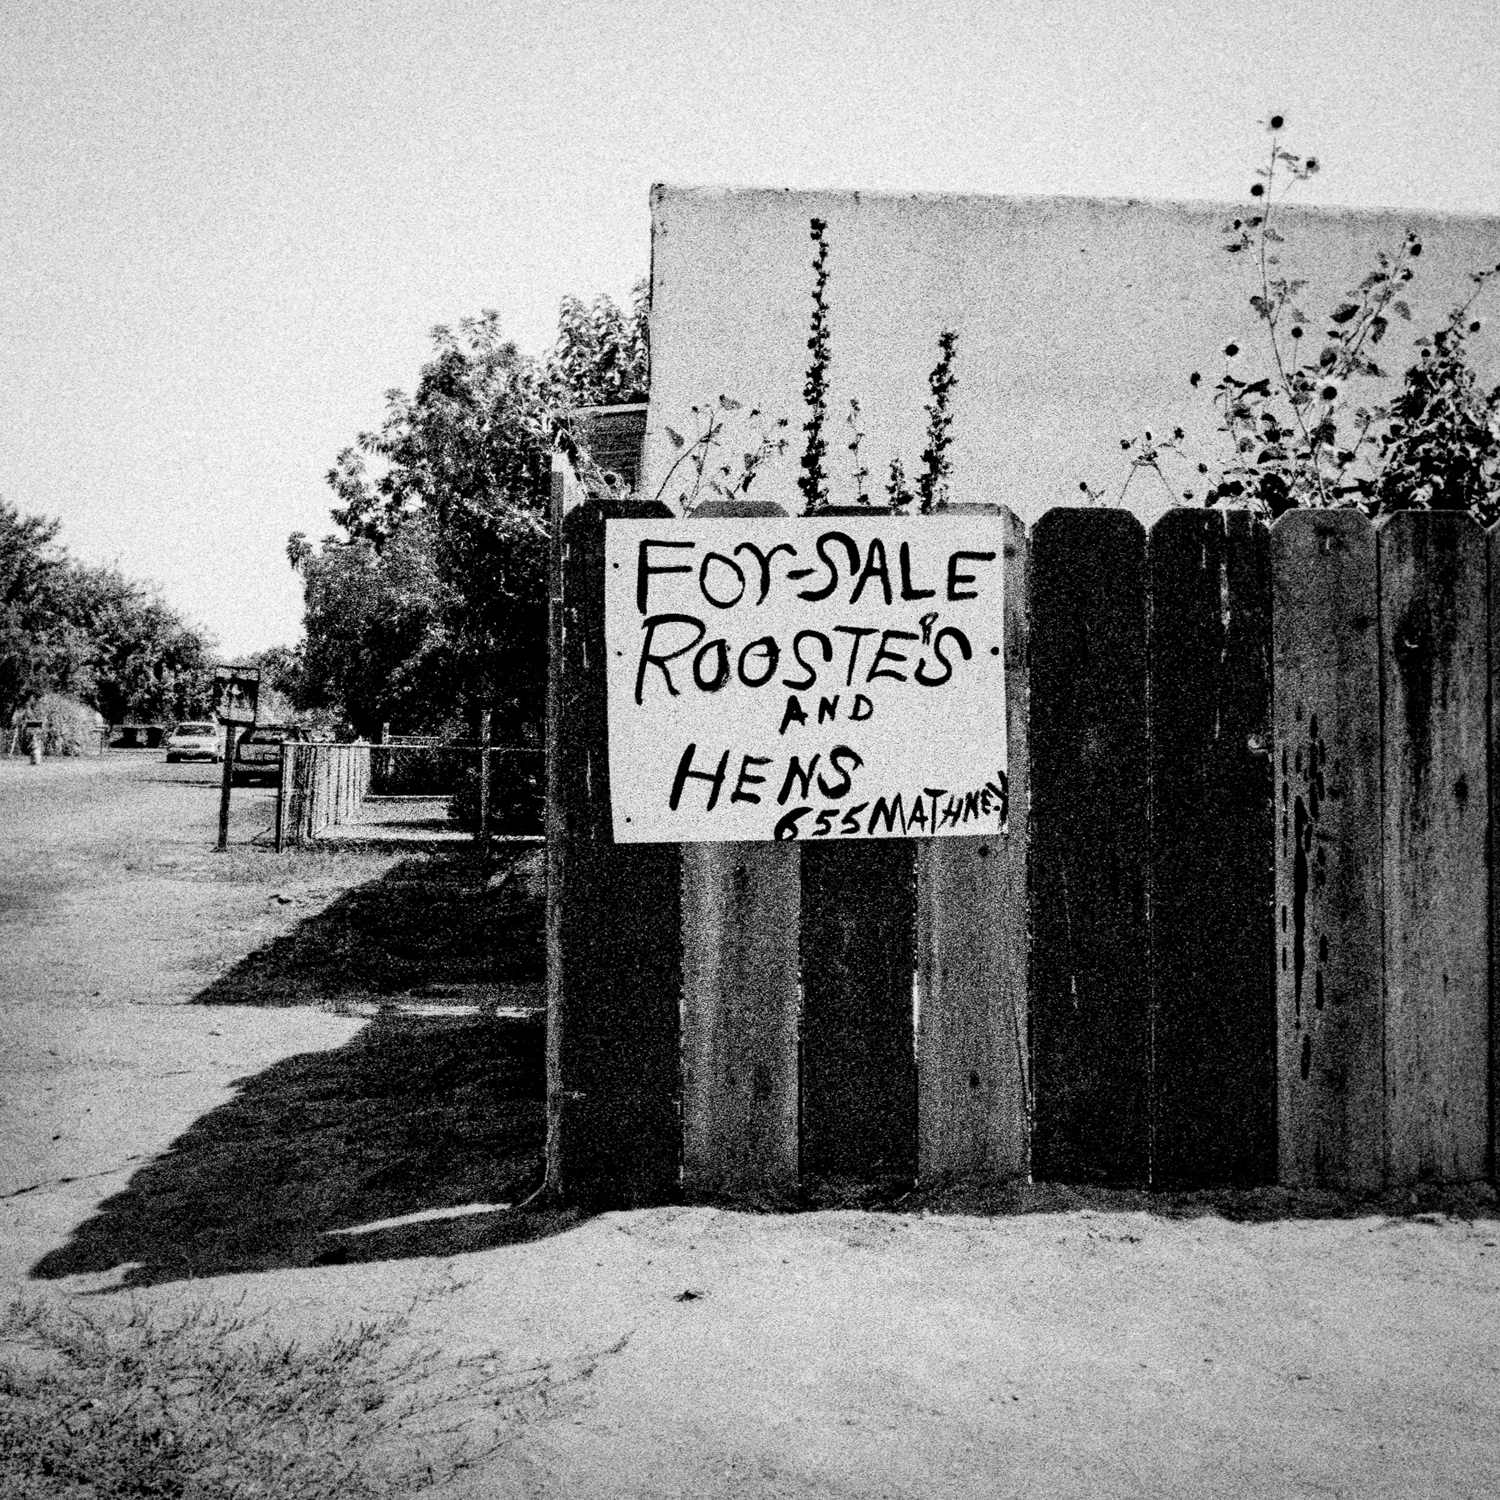 Sale sign. Tulare, CA. 36°12’27”N 119°20’50”W #geographyofpoverty
                              
                              Tulare is a city in Tulare County, California, United States. The population was 59,278 at the 2010 census. Residents have a $18,203 per capita income and 20.2% live below the poverty level.